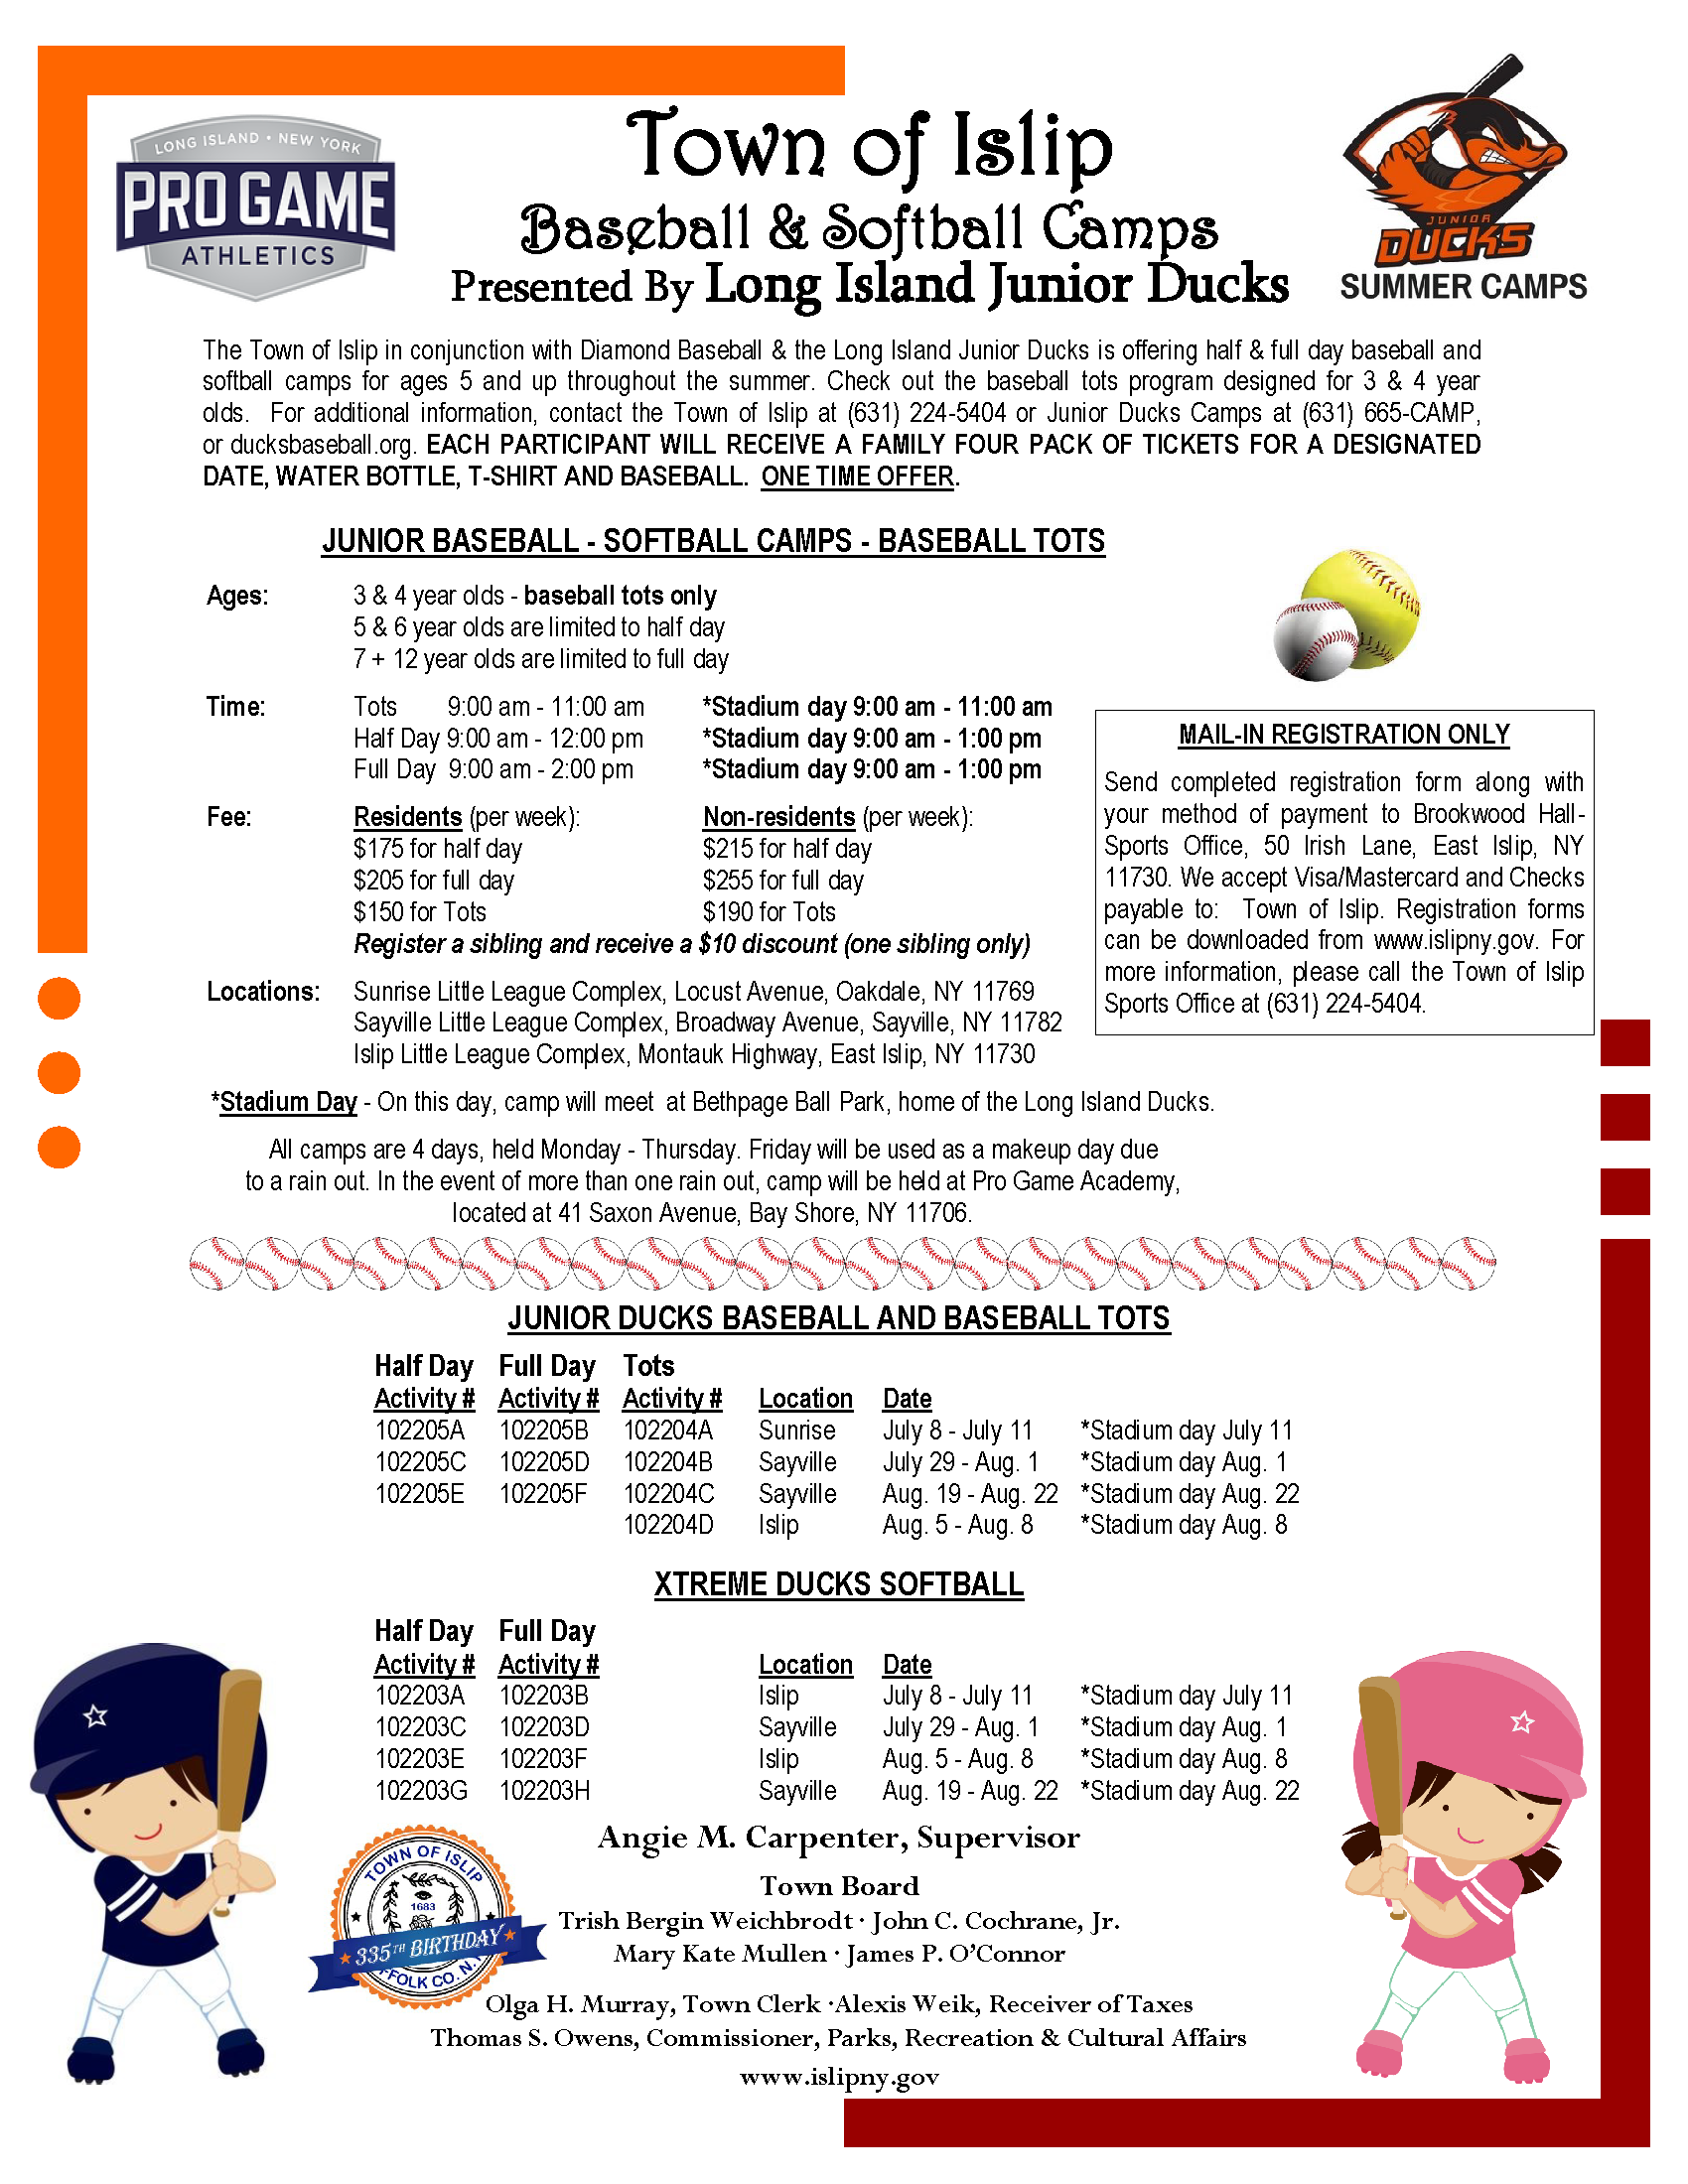 a flyer announcing the 2019 baseball camp, call (631) 224-5404 for more information.